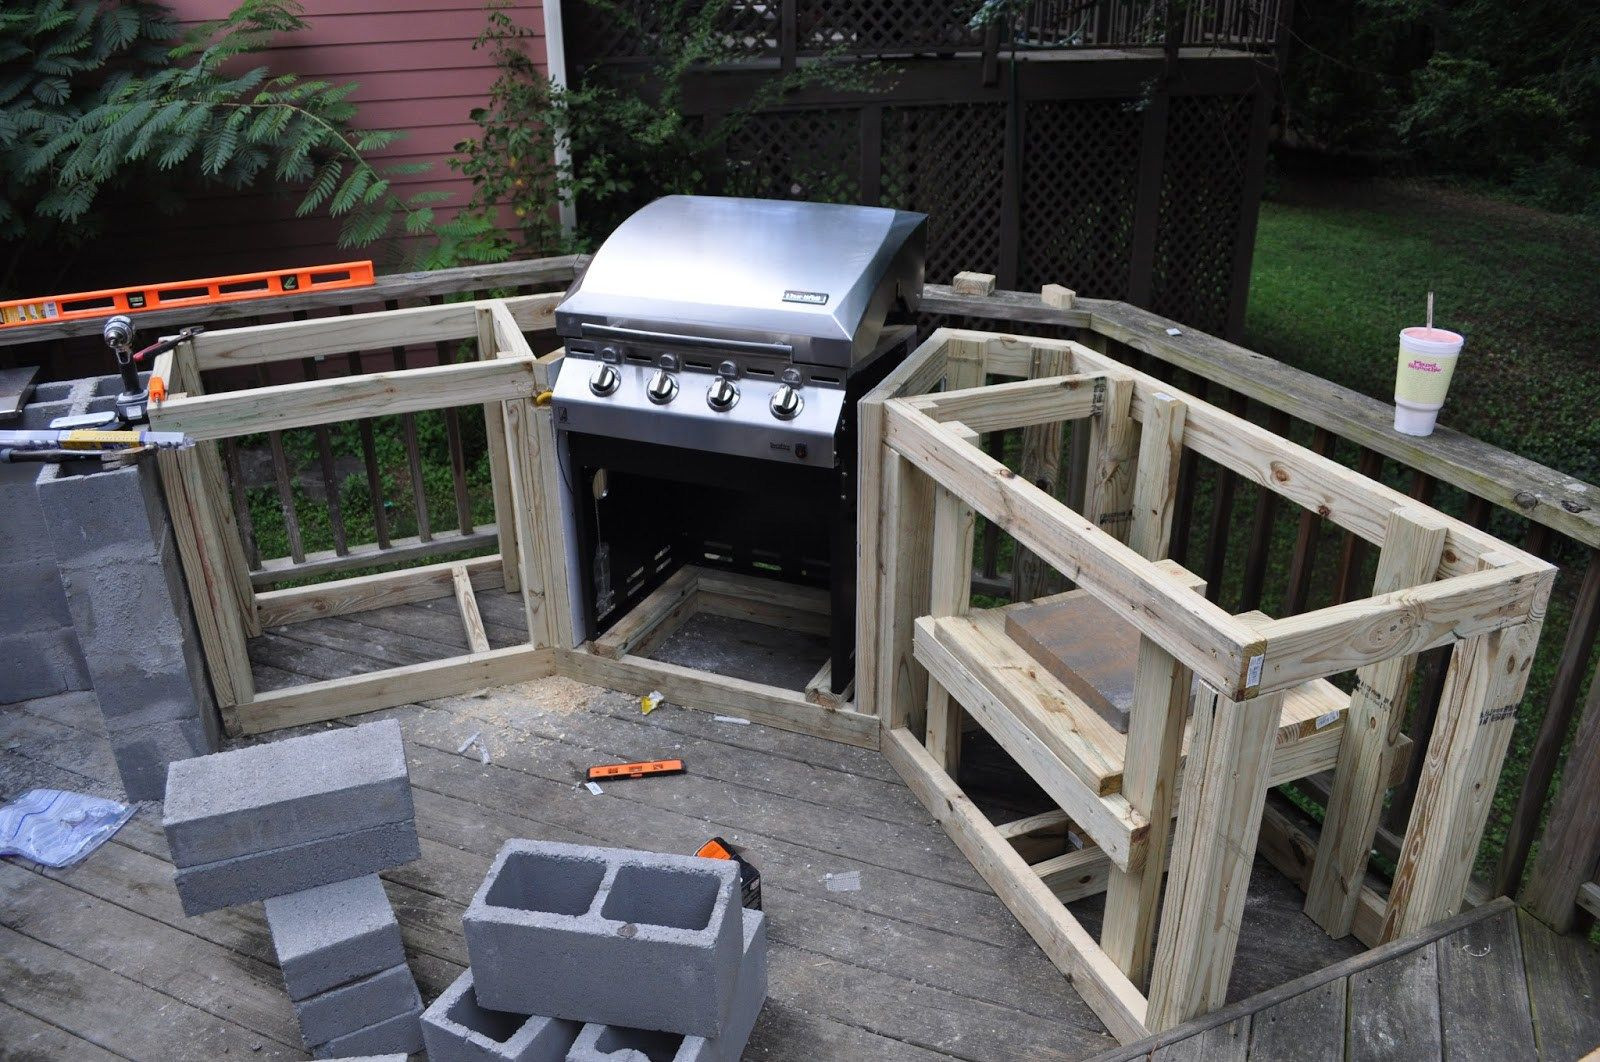 Outdoor Kitchen Frame Kits Awesome Diy Outdoor Kitchen Frames Kits Frame Wood And S 1 Of Outdoor Kitchen Frame Kits 